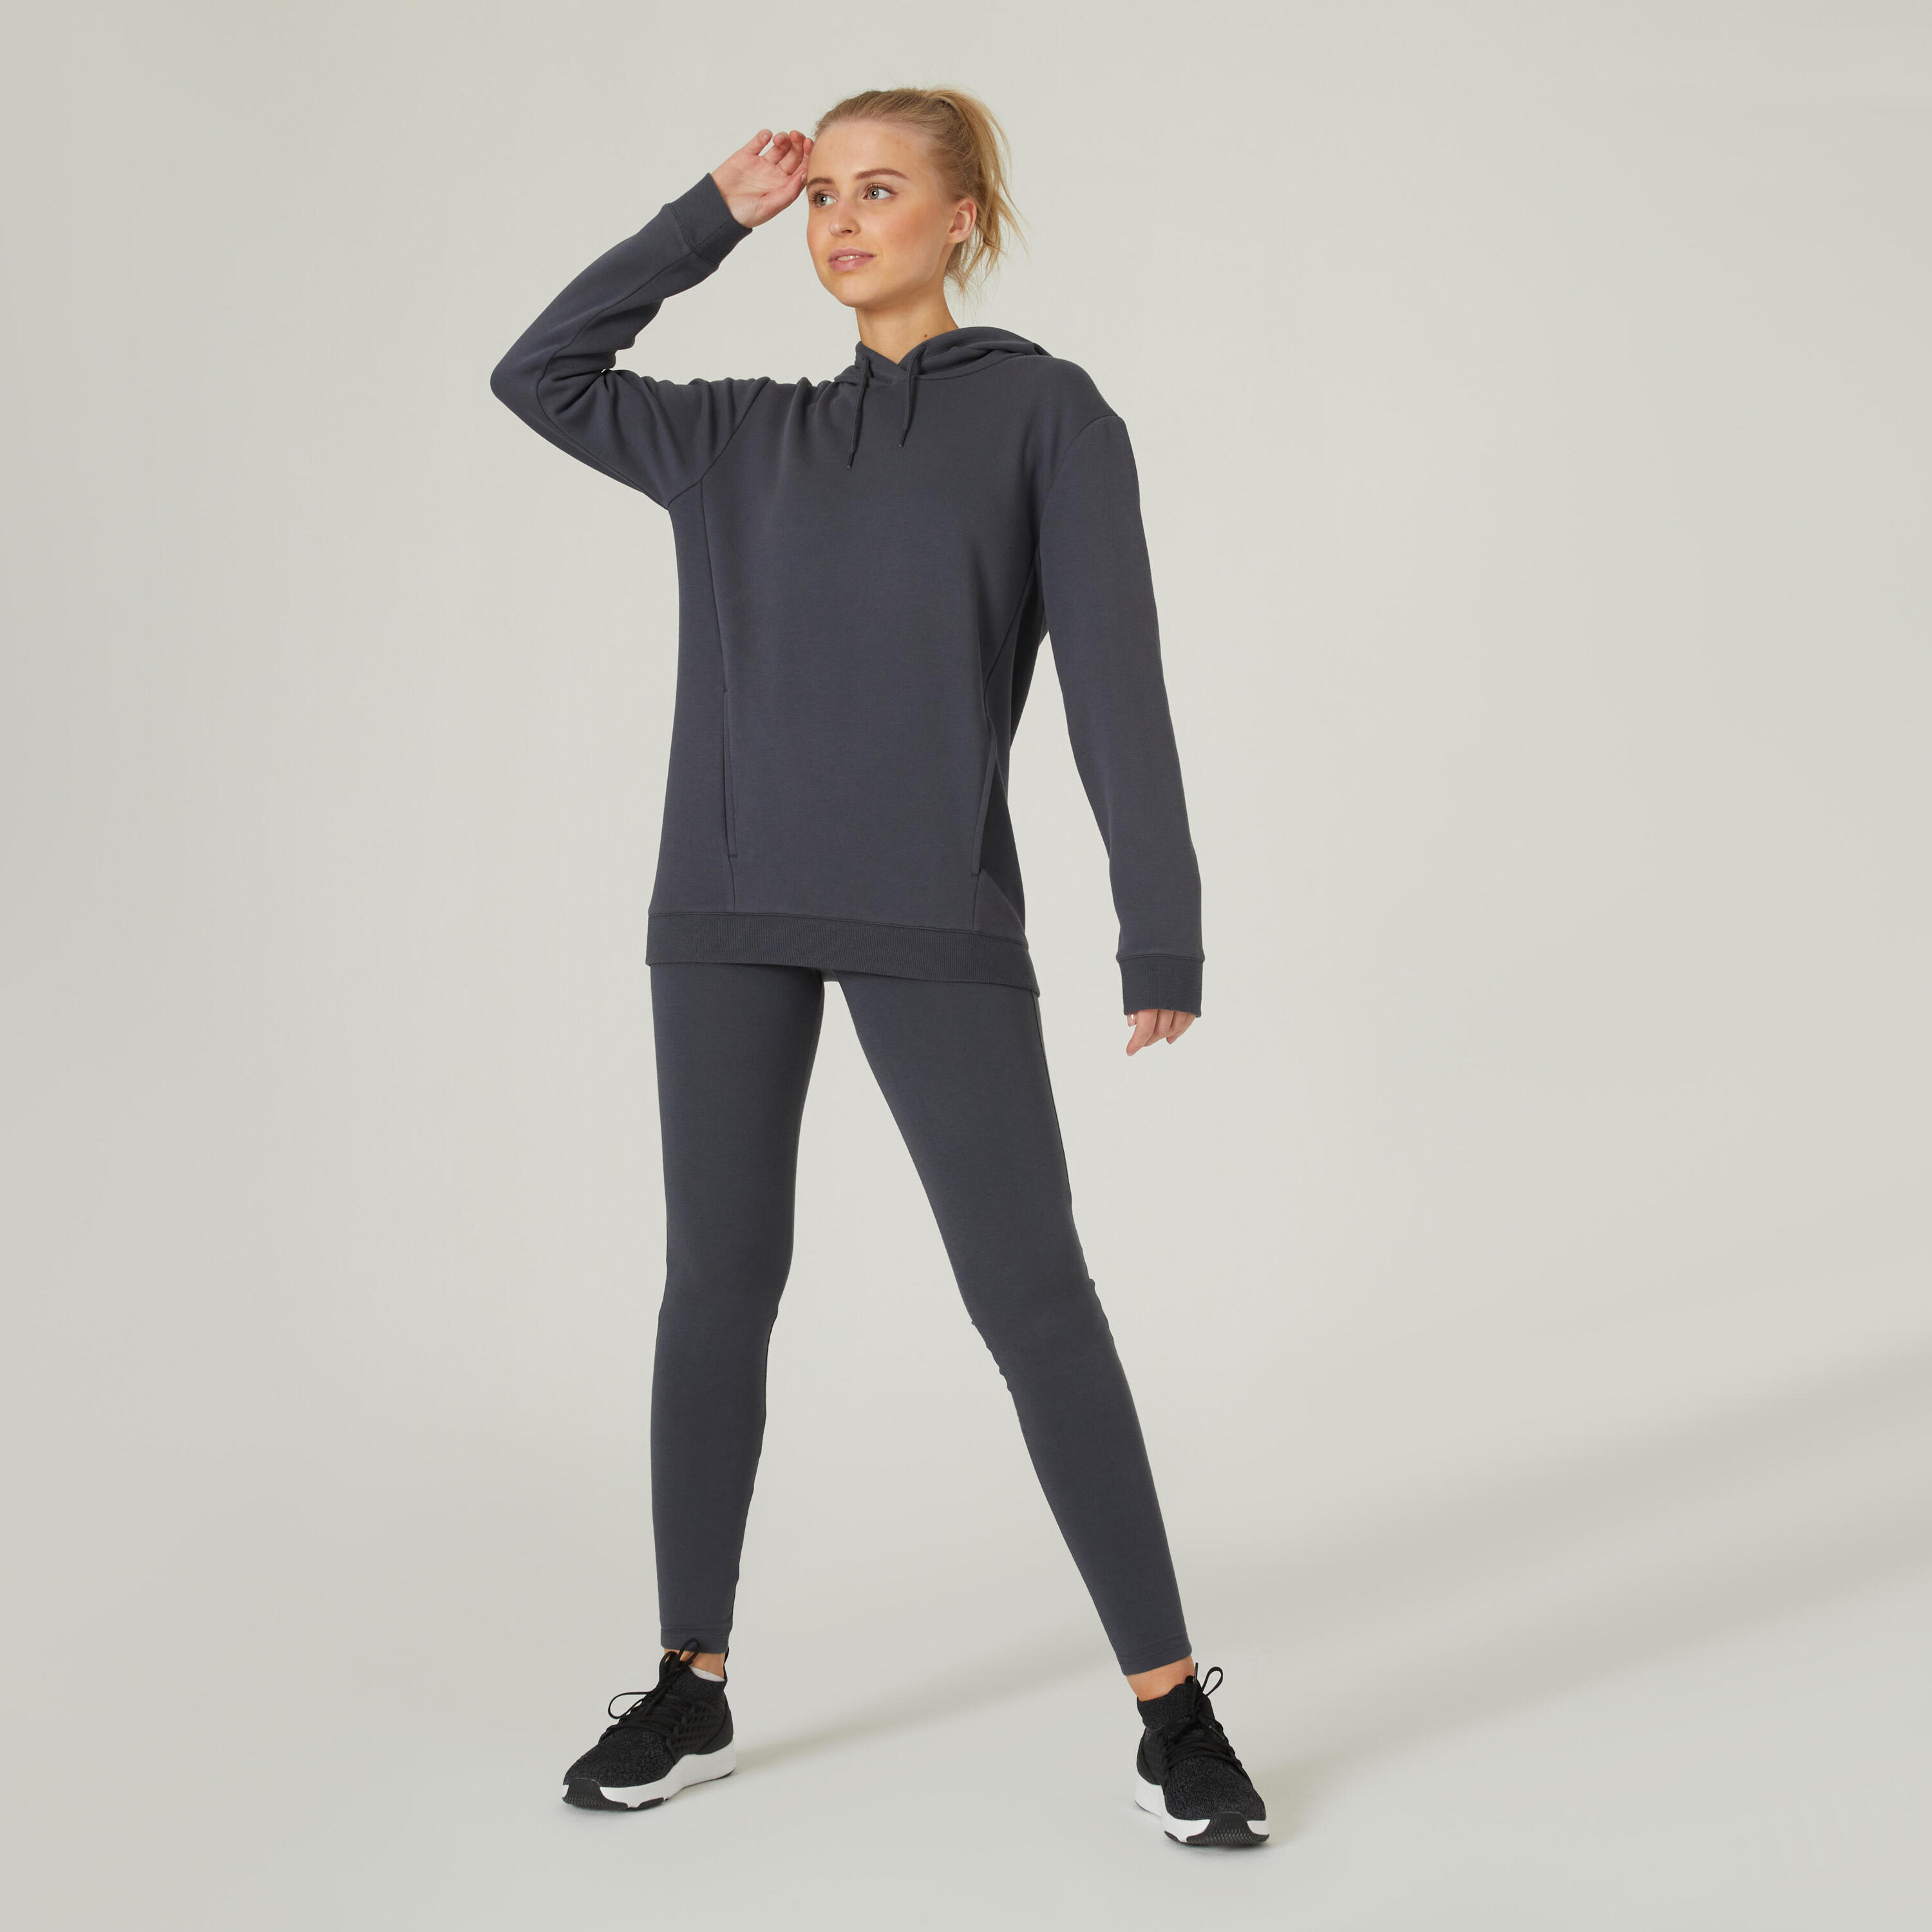 Women's Fitness Hoodie 520 - Abyss Grey 3/6